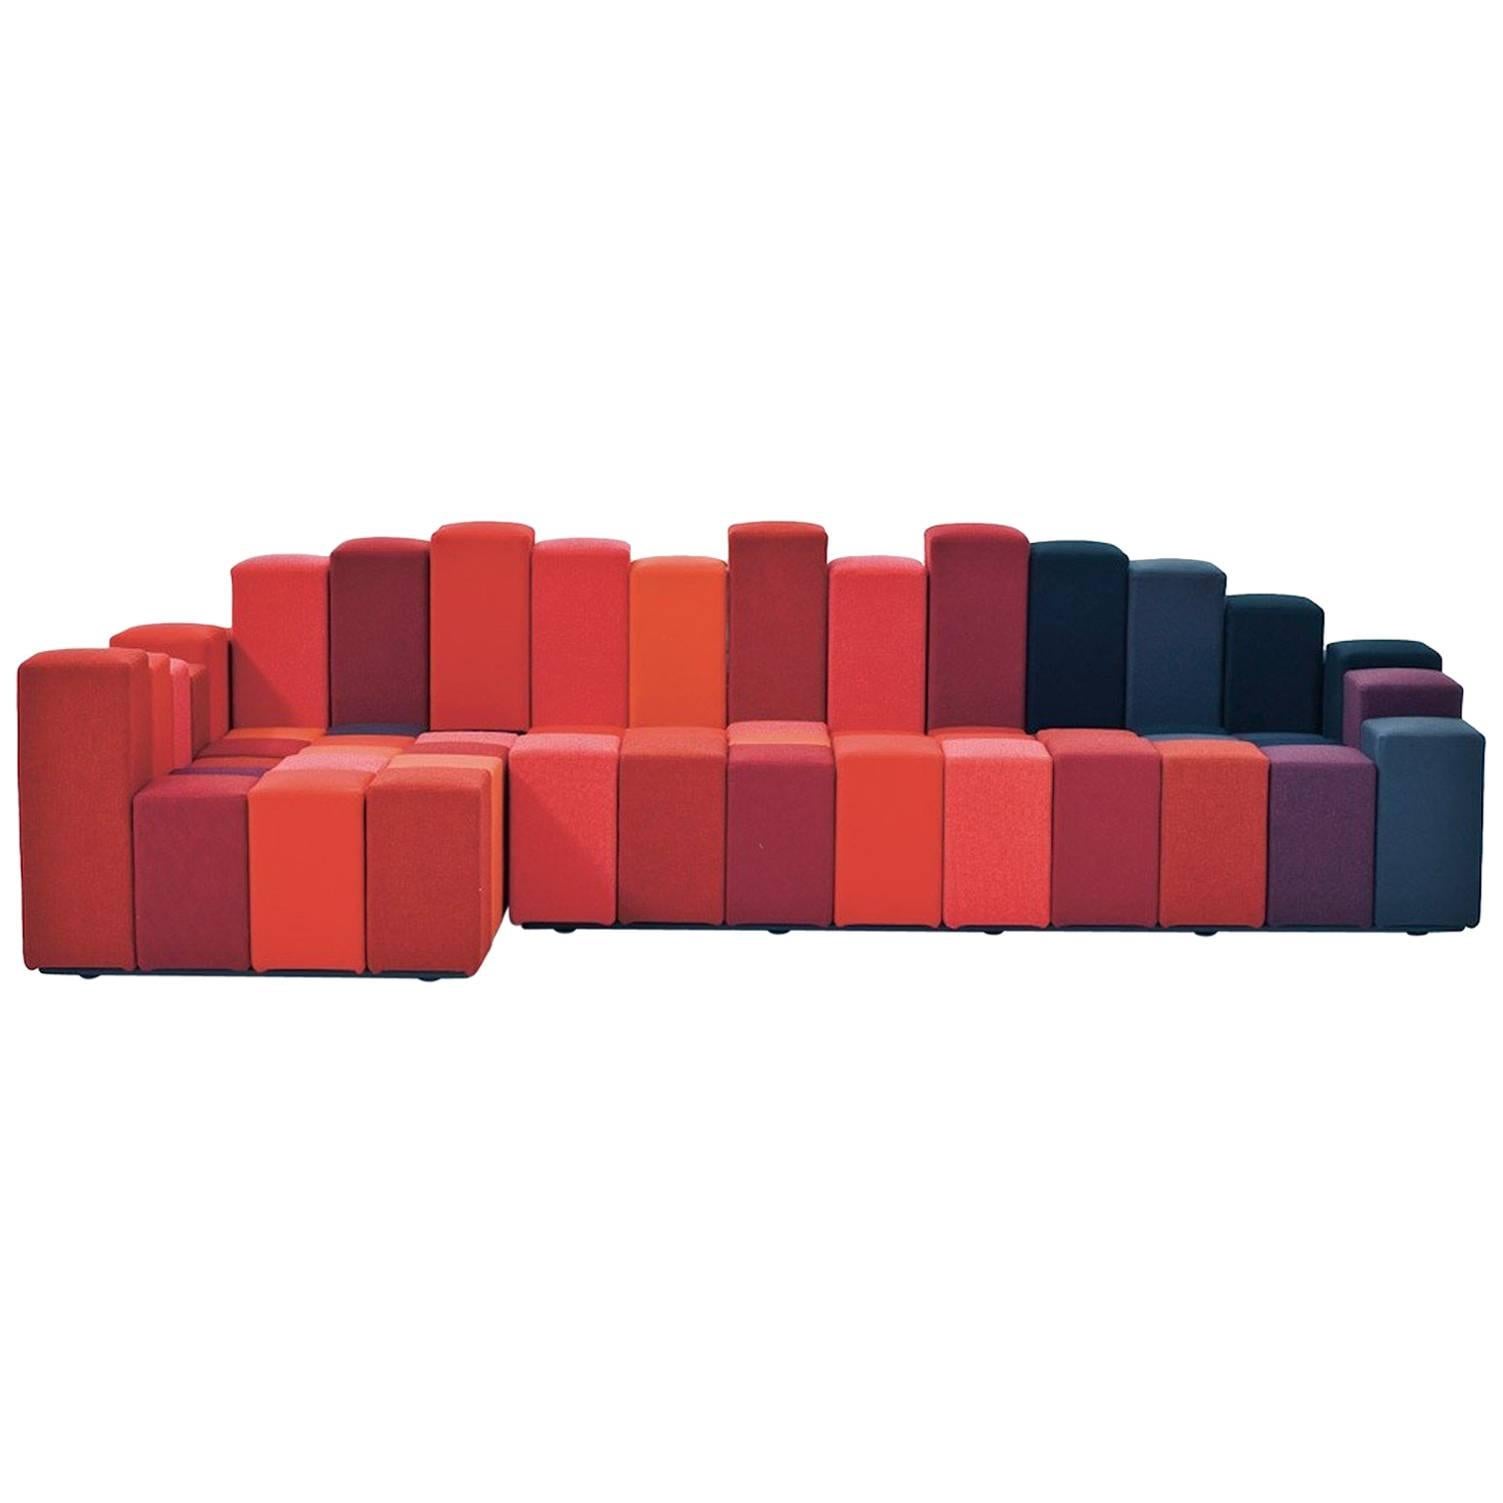 Do-Lo-Rez Collection by Ron Arad in Blue, Grey or Red Combinations for Moroso For Sale